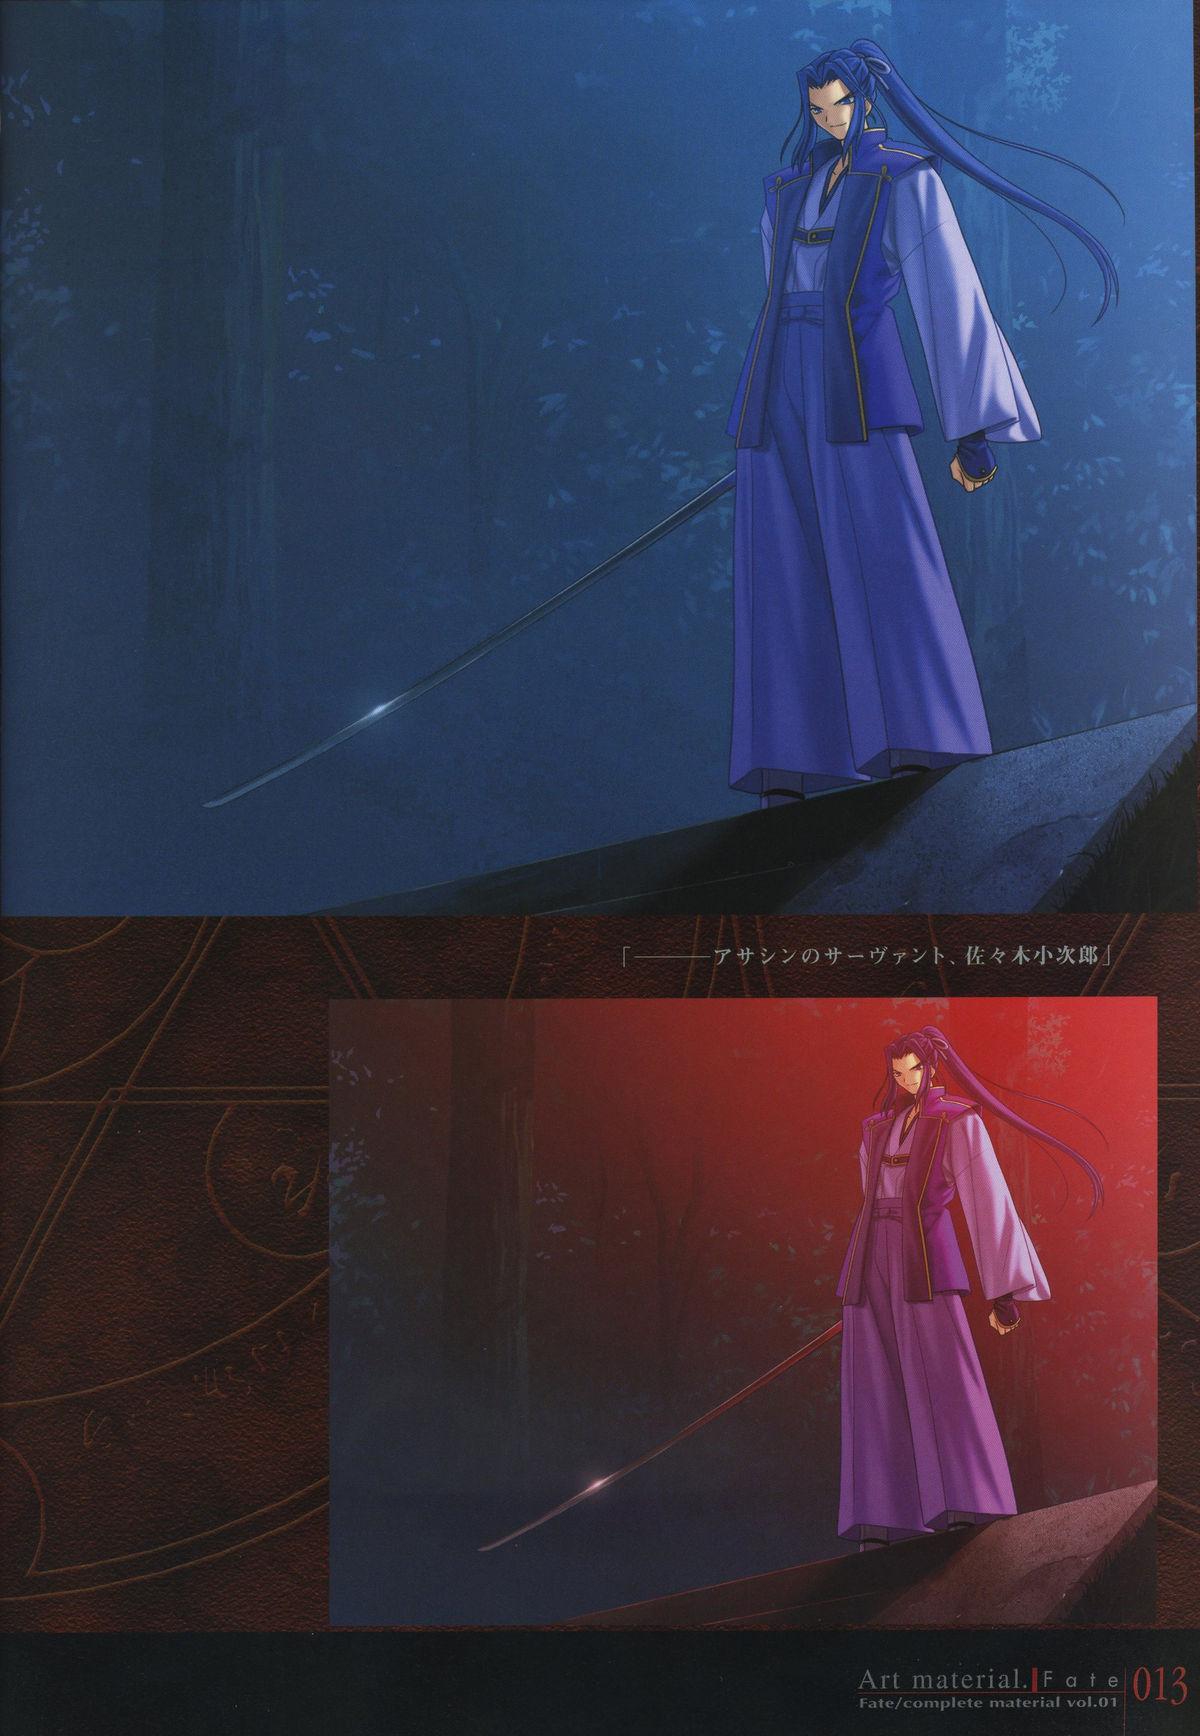 Fate/complete material I - Art material. 17